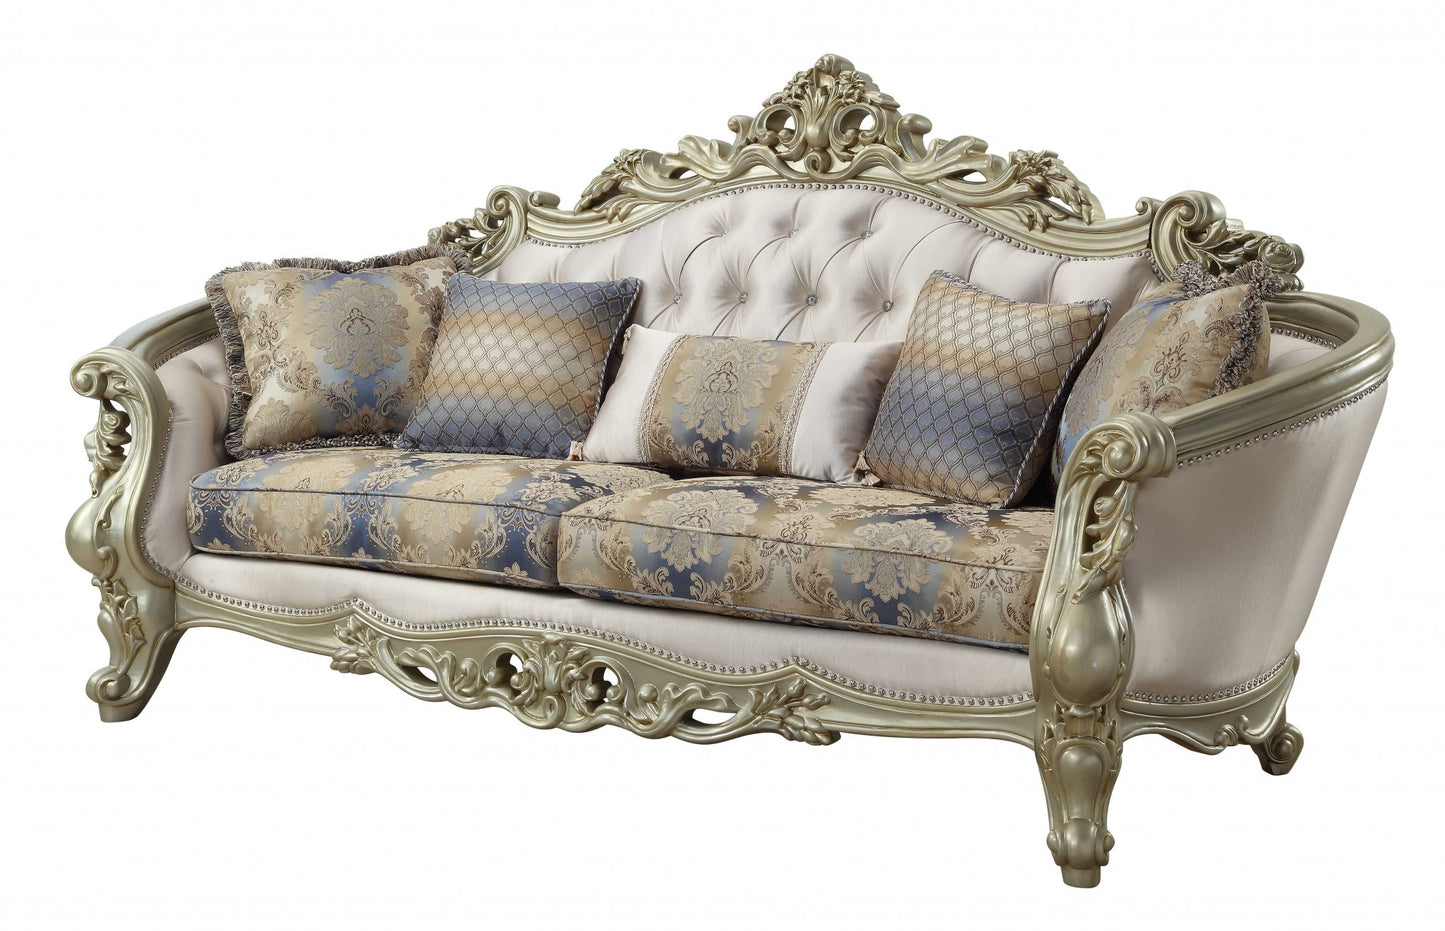 40" Antiqued White Velvet Curved Floral Sofa And Toss Pillows With Champagne Legs